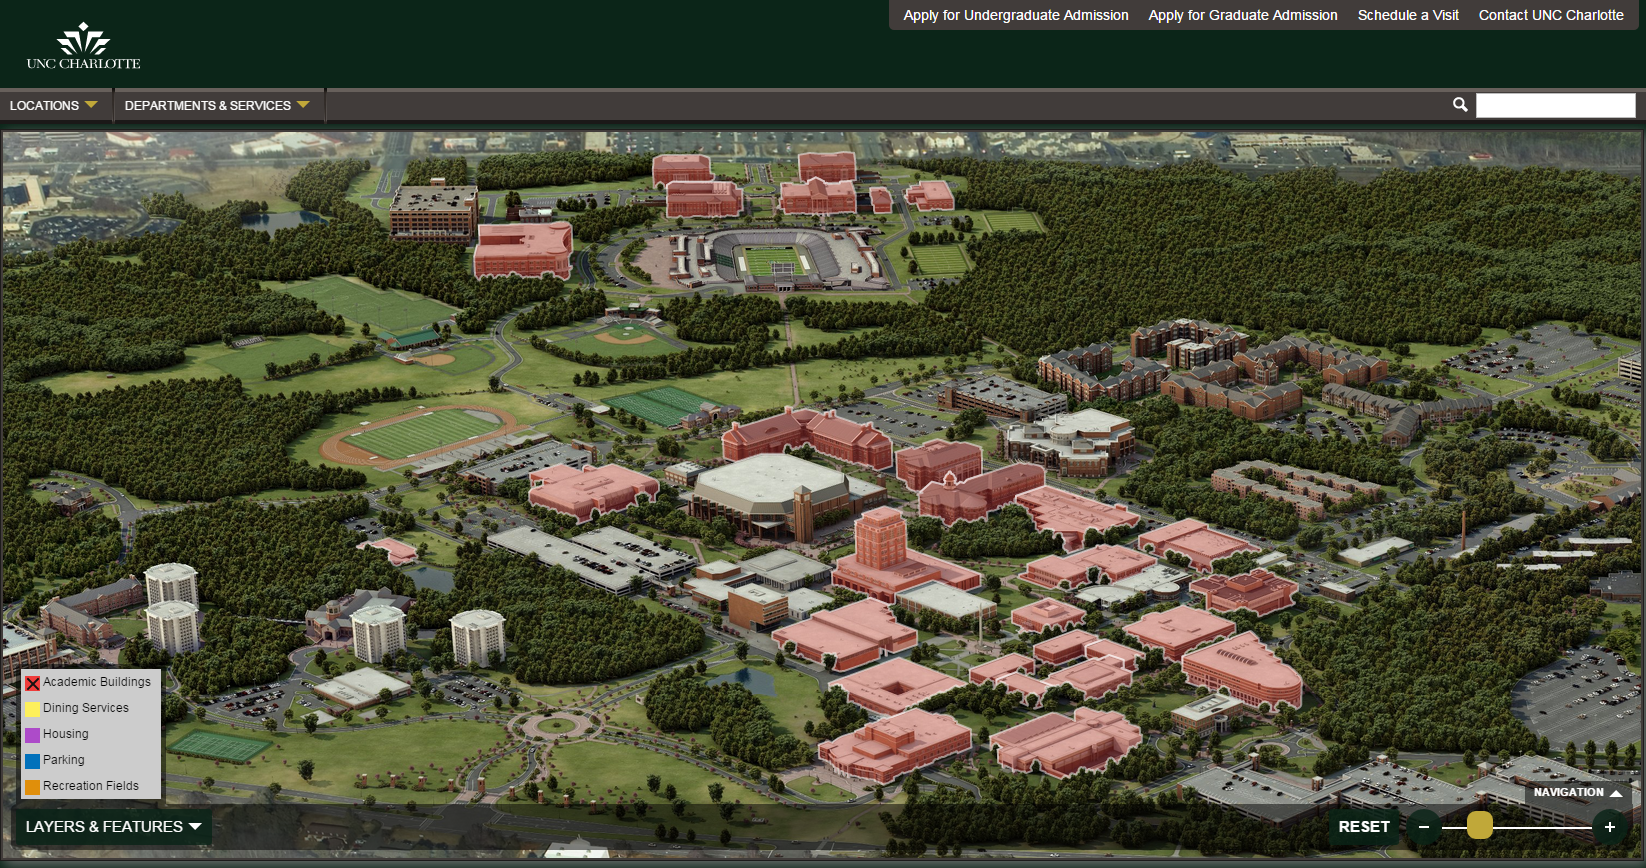 Uncc Interactive Campus Map Graphical Layers on Interactive Campus Maps